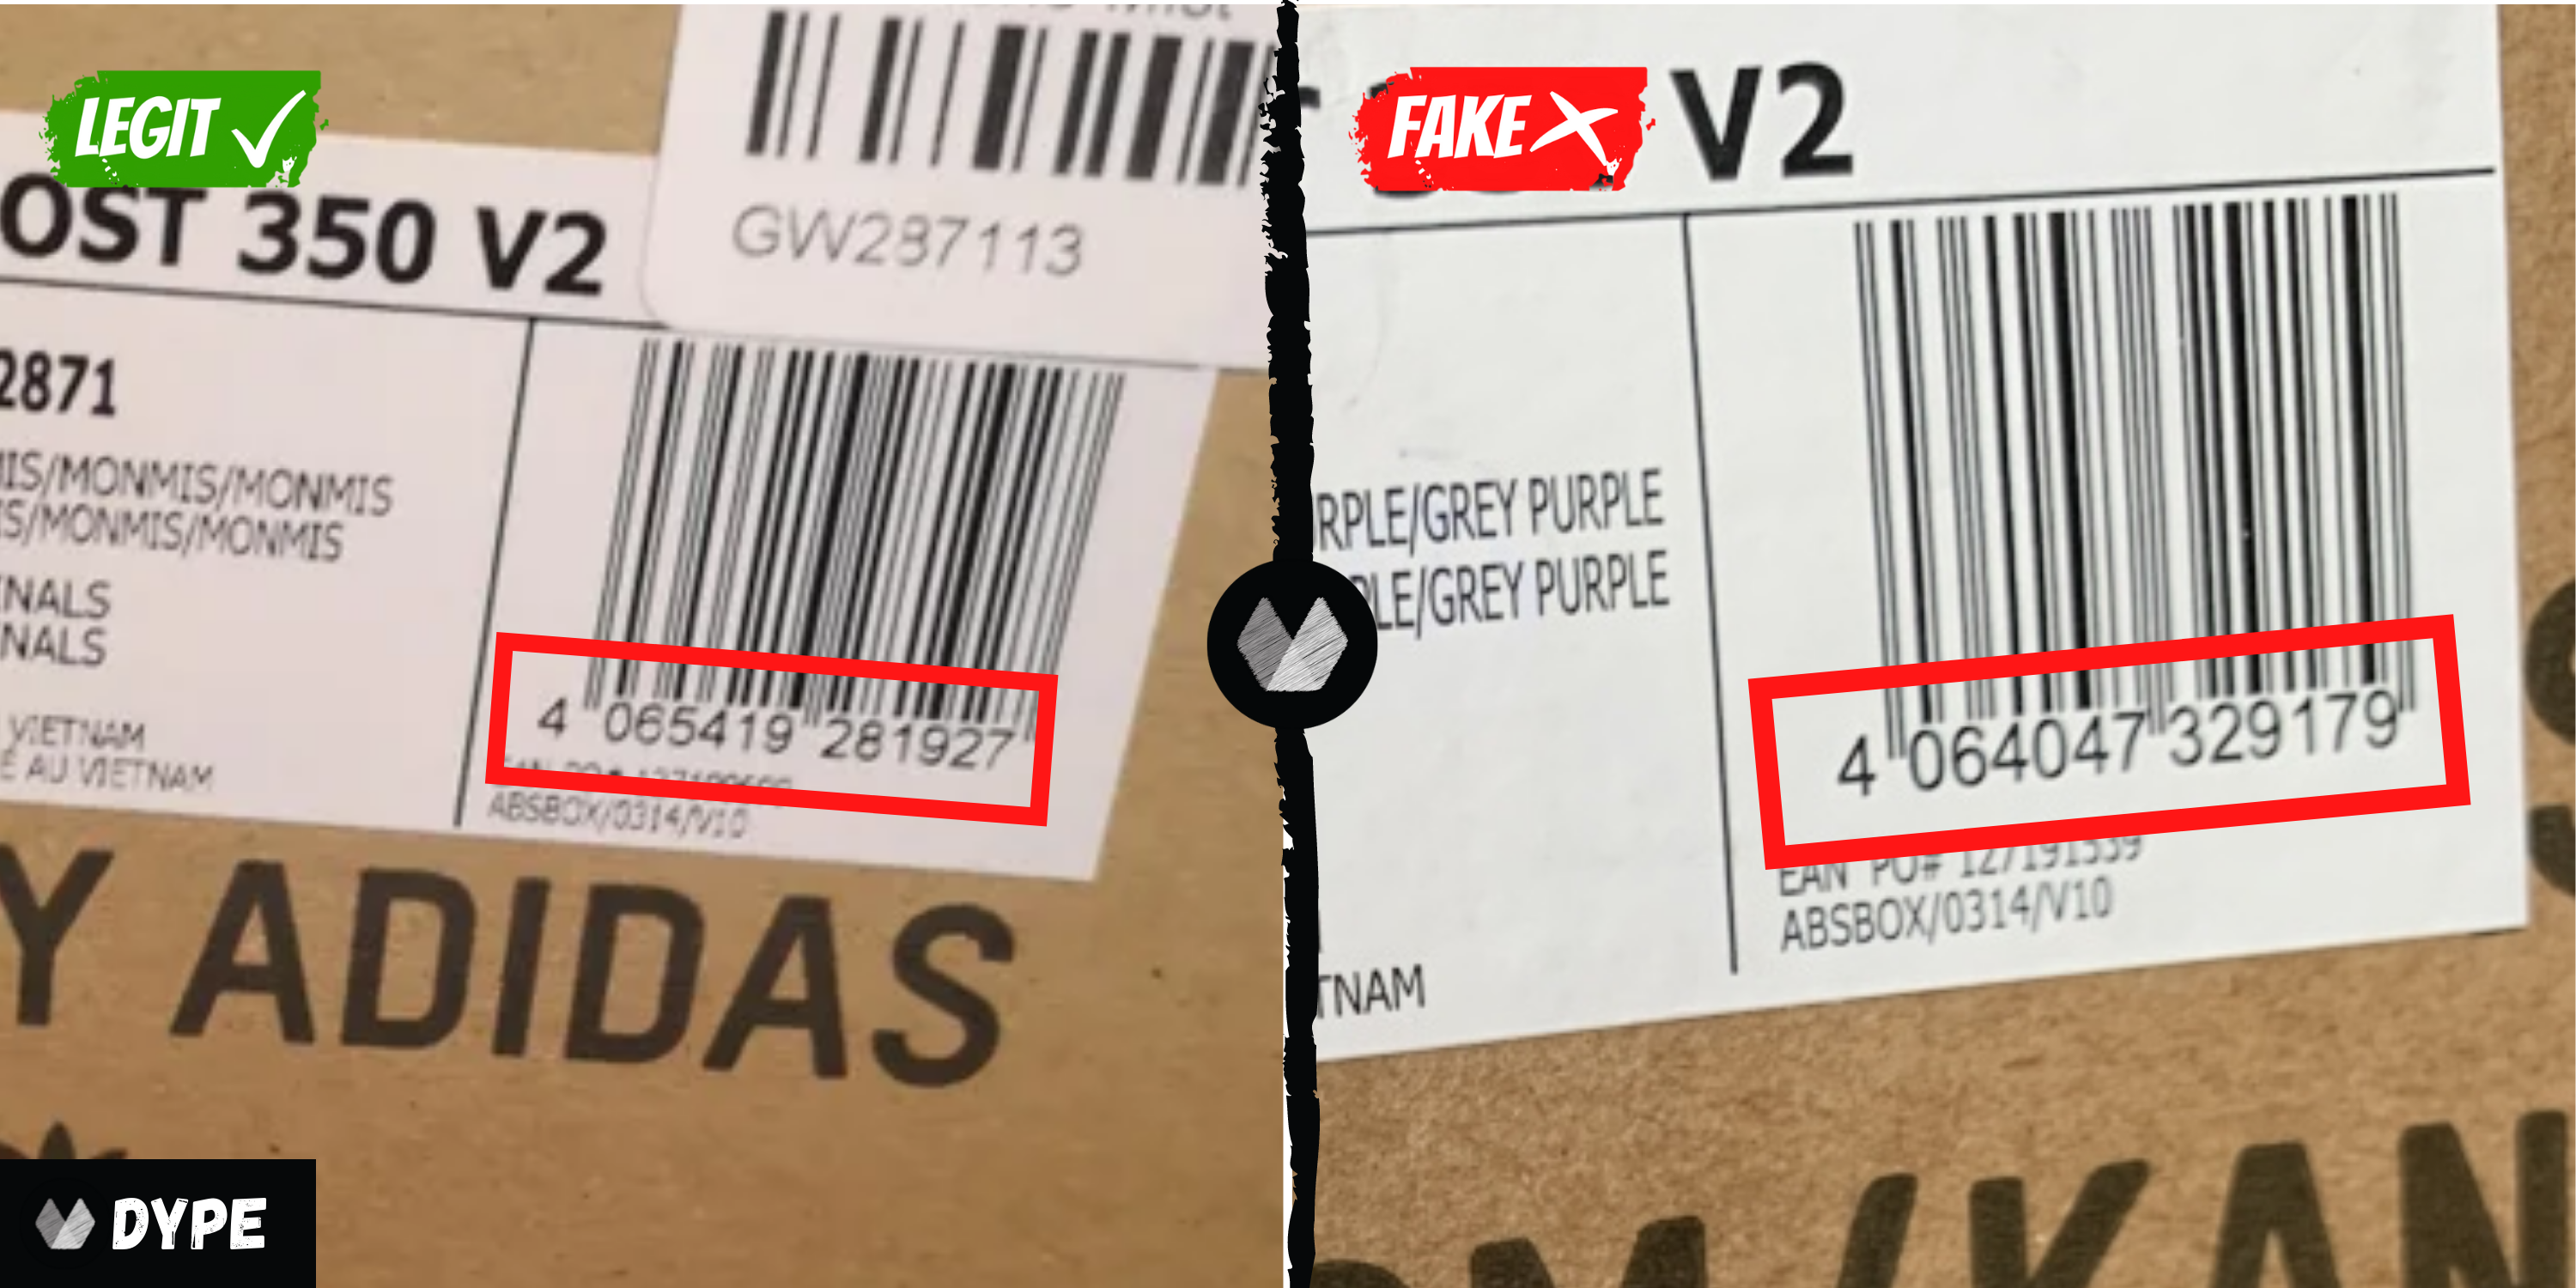 How To Spot Fake Yeezy Boost 350 V2 Natural - Legit Check